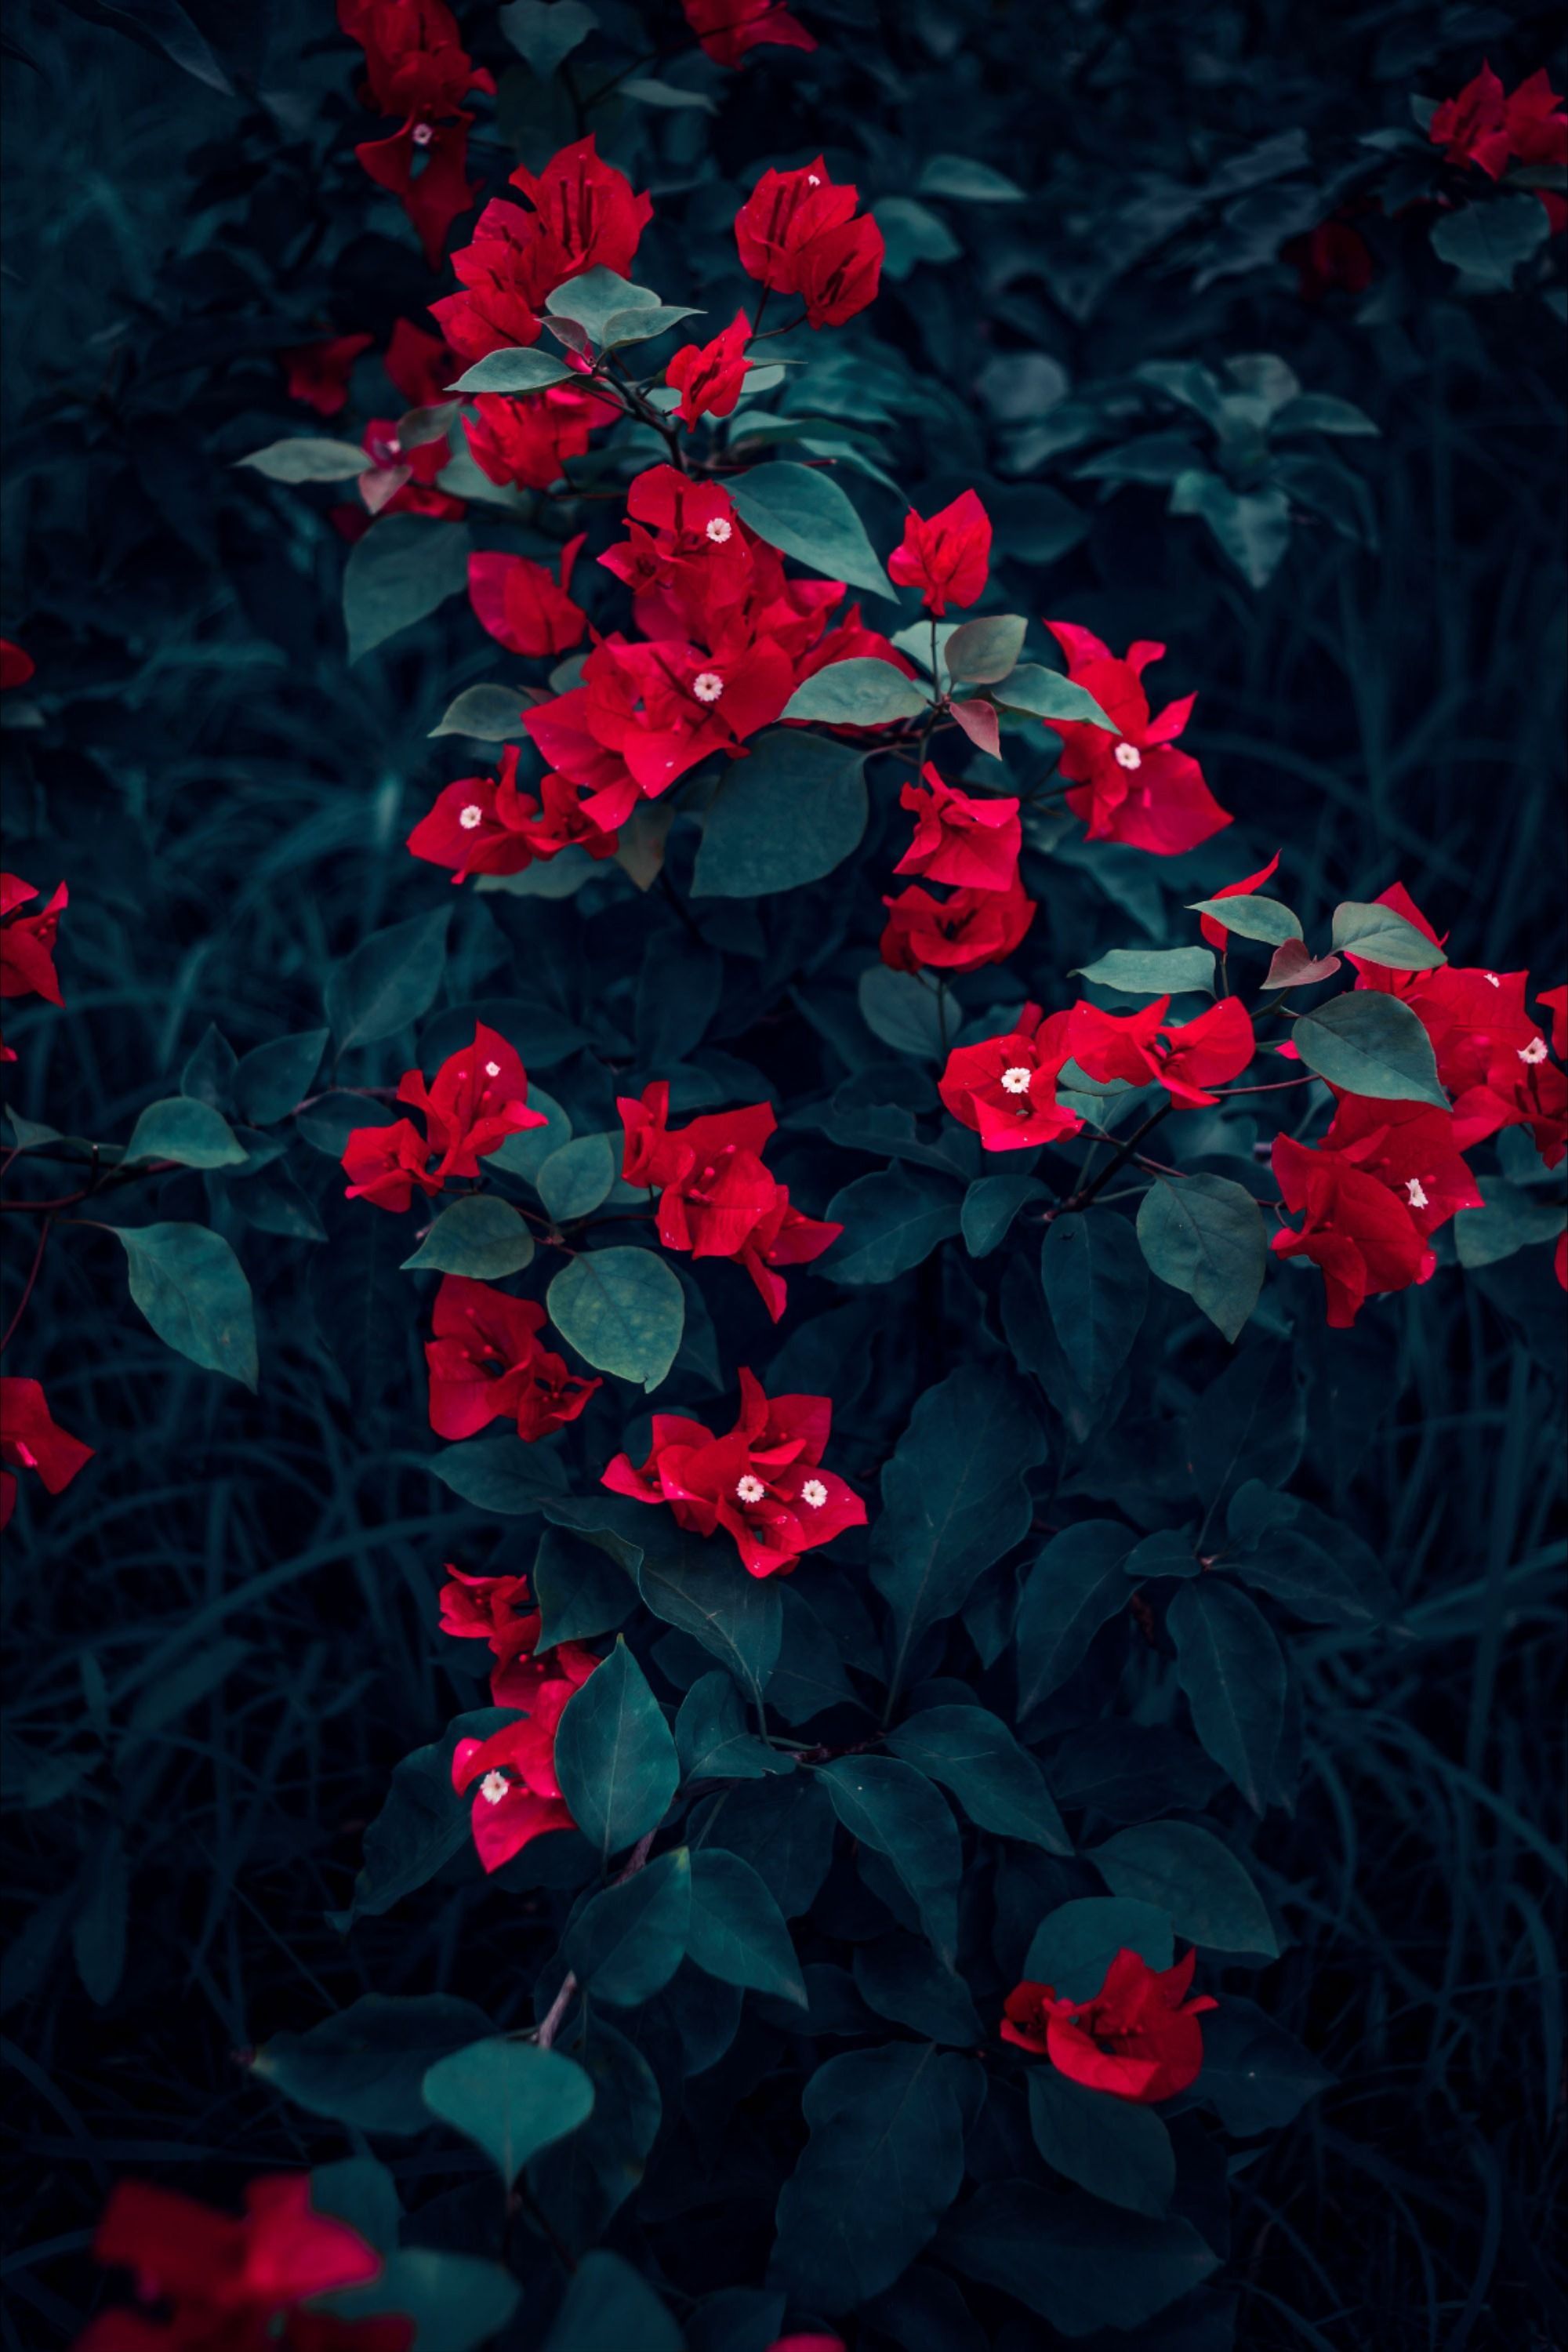 Image By: cheng feng. Plants, Drying roses, Red petals